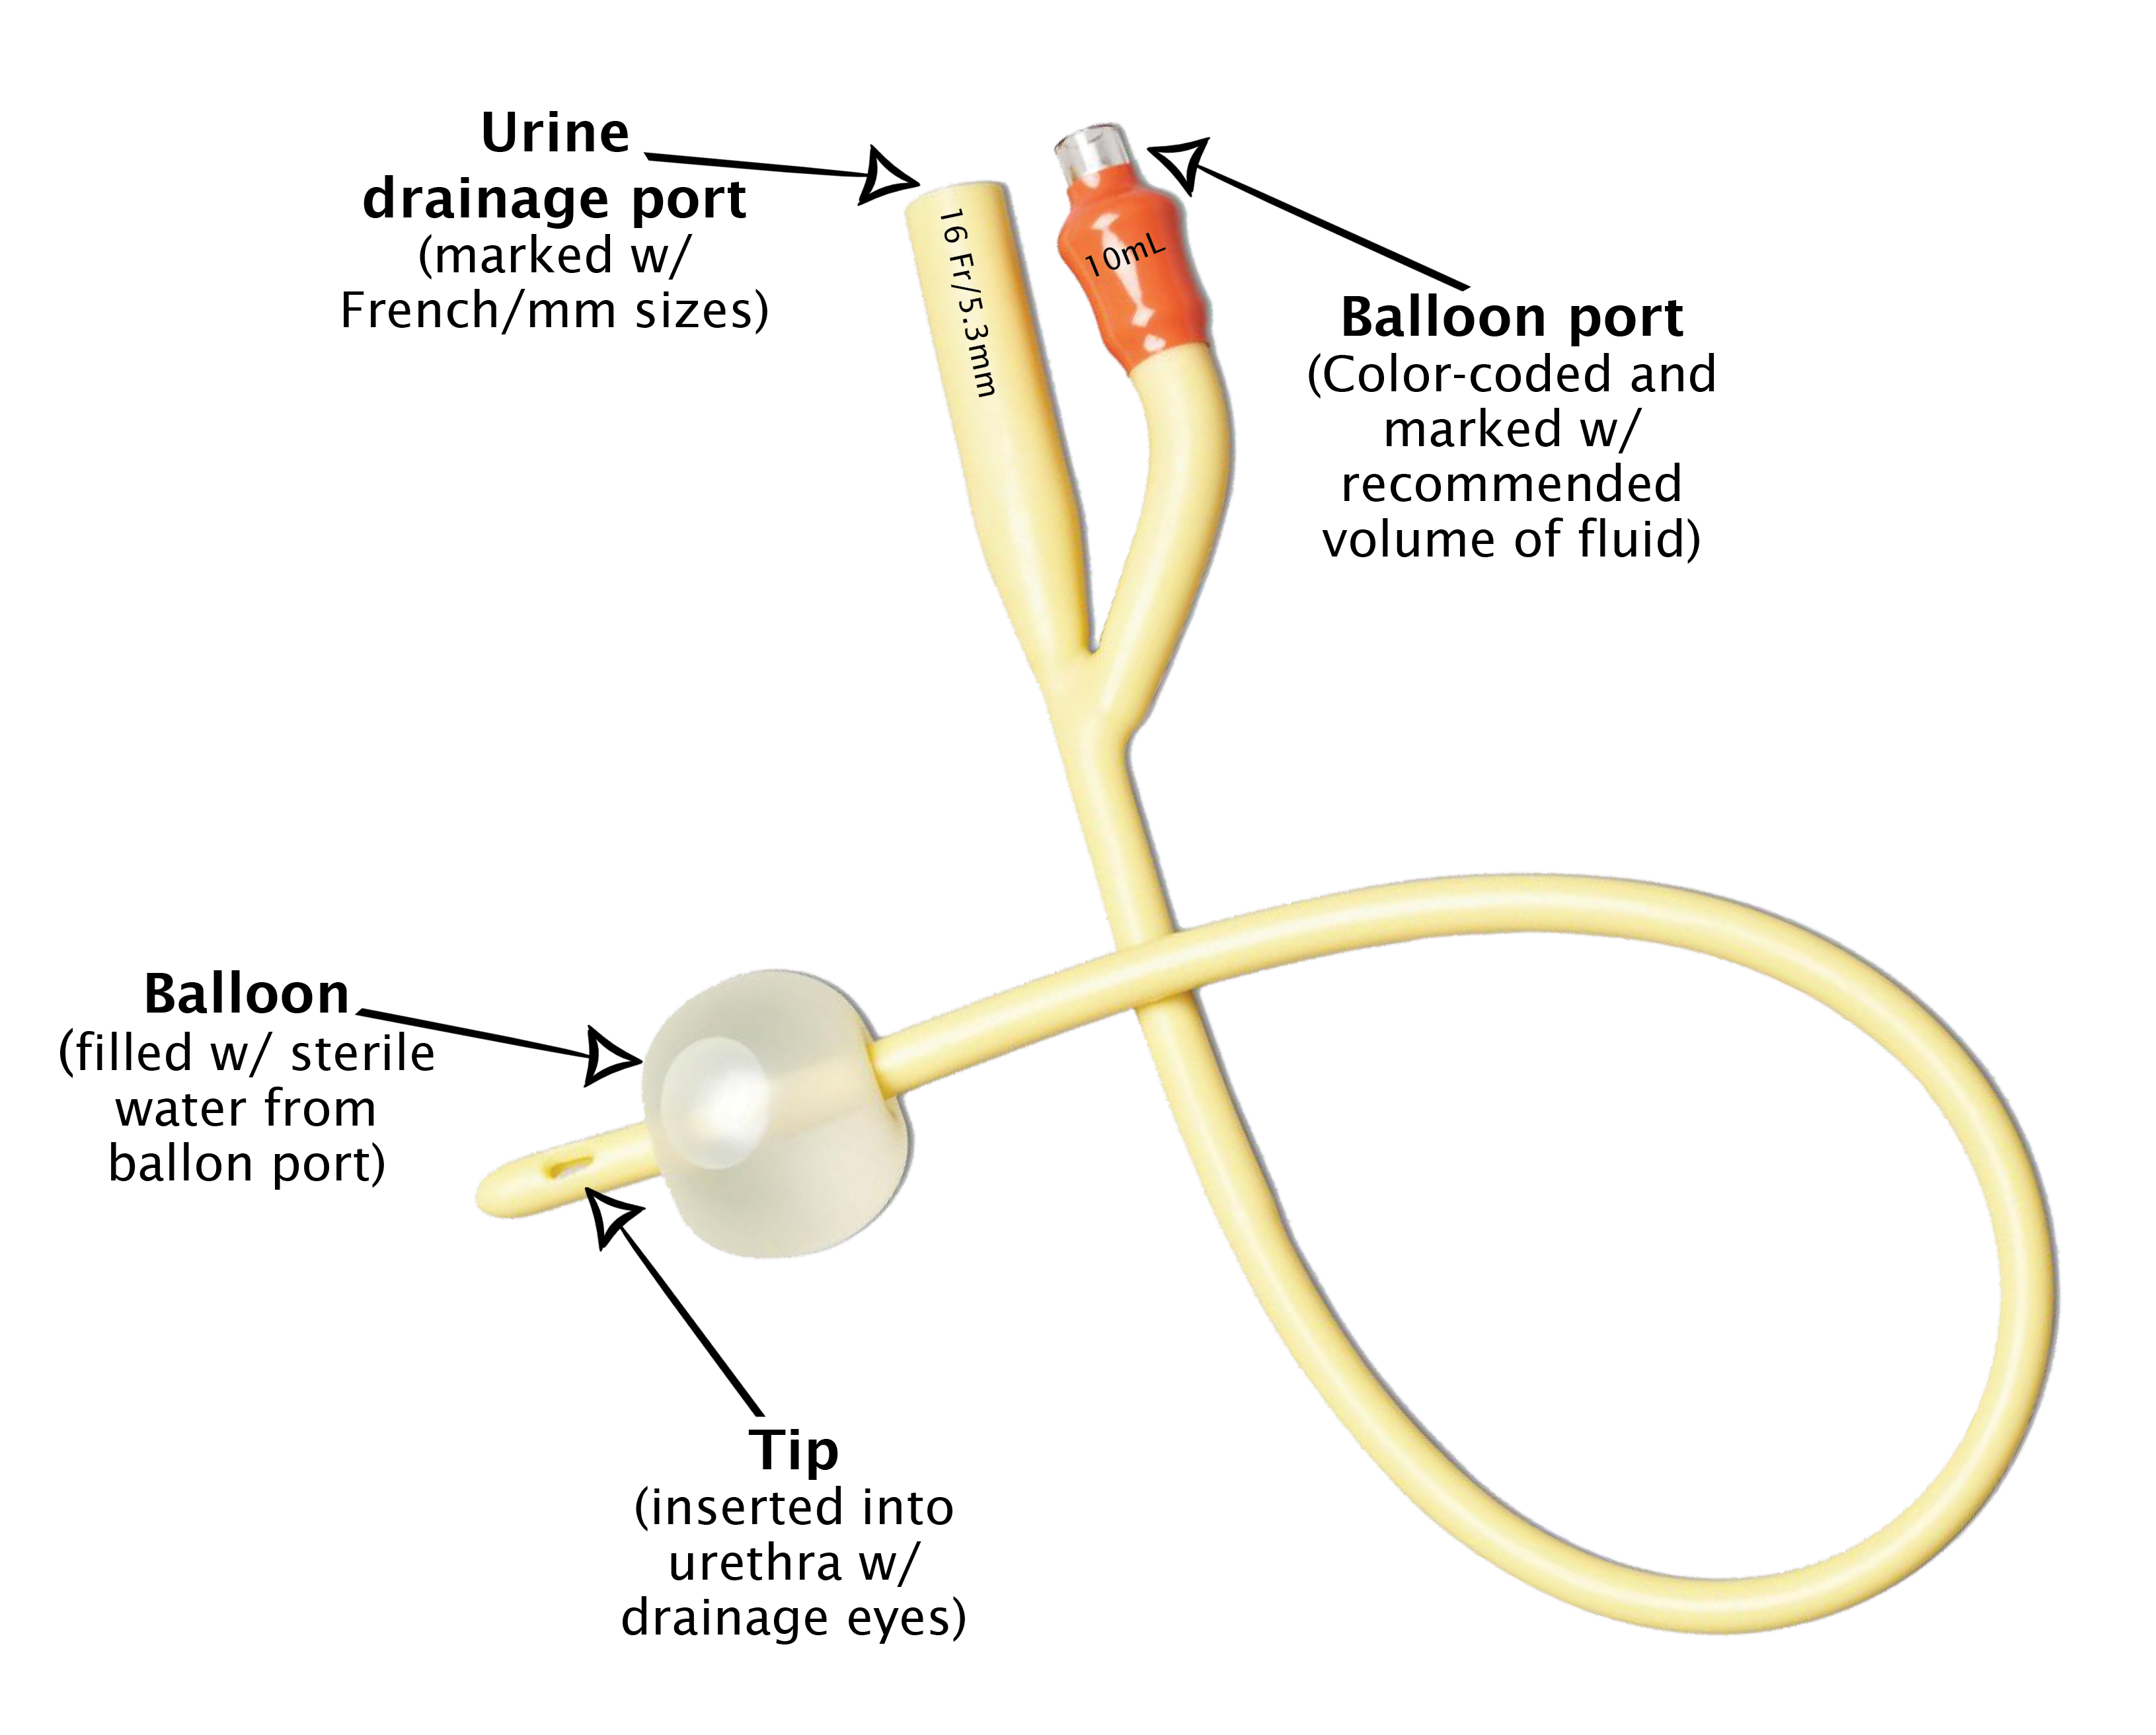 details and specific parts of a Foley catheter